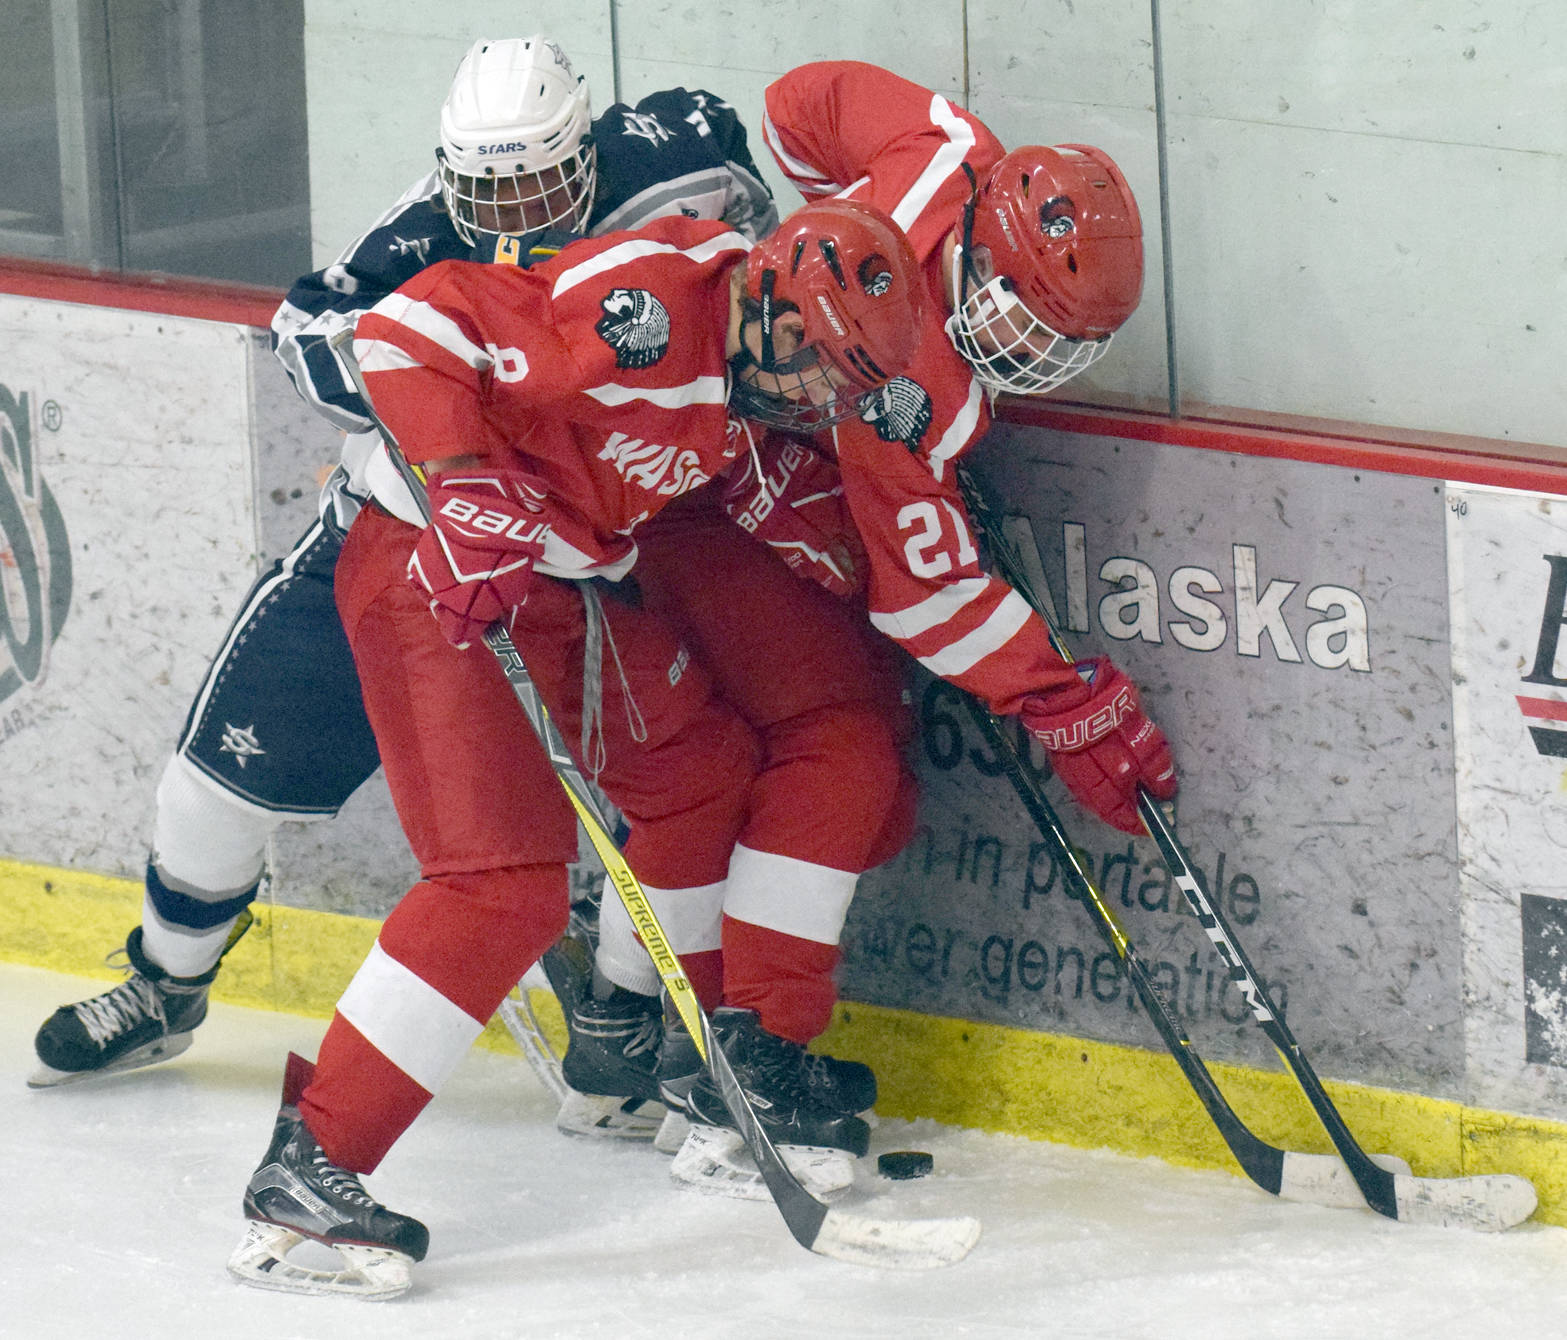 Soldotna’s JD Schmelzenbach battles with Wasilla’s McKinley Larson and Langston Bouma for the puck Friday, Dec. 1, 2017, at the Soldotna Regional Sports Complex. (Photo by Jeff Helminiak/Peninsula Clarion)